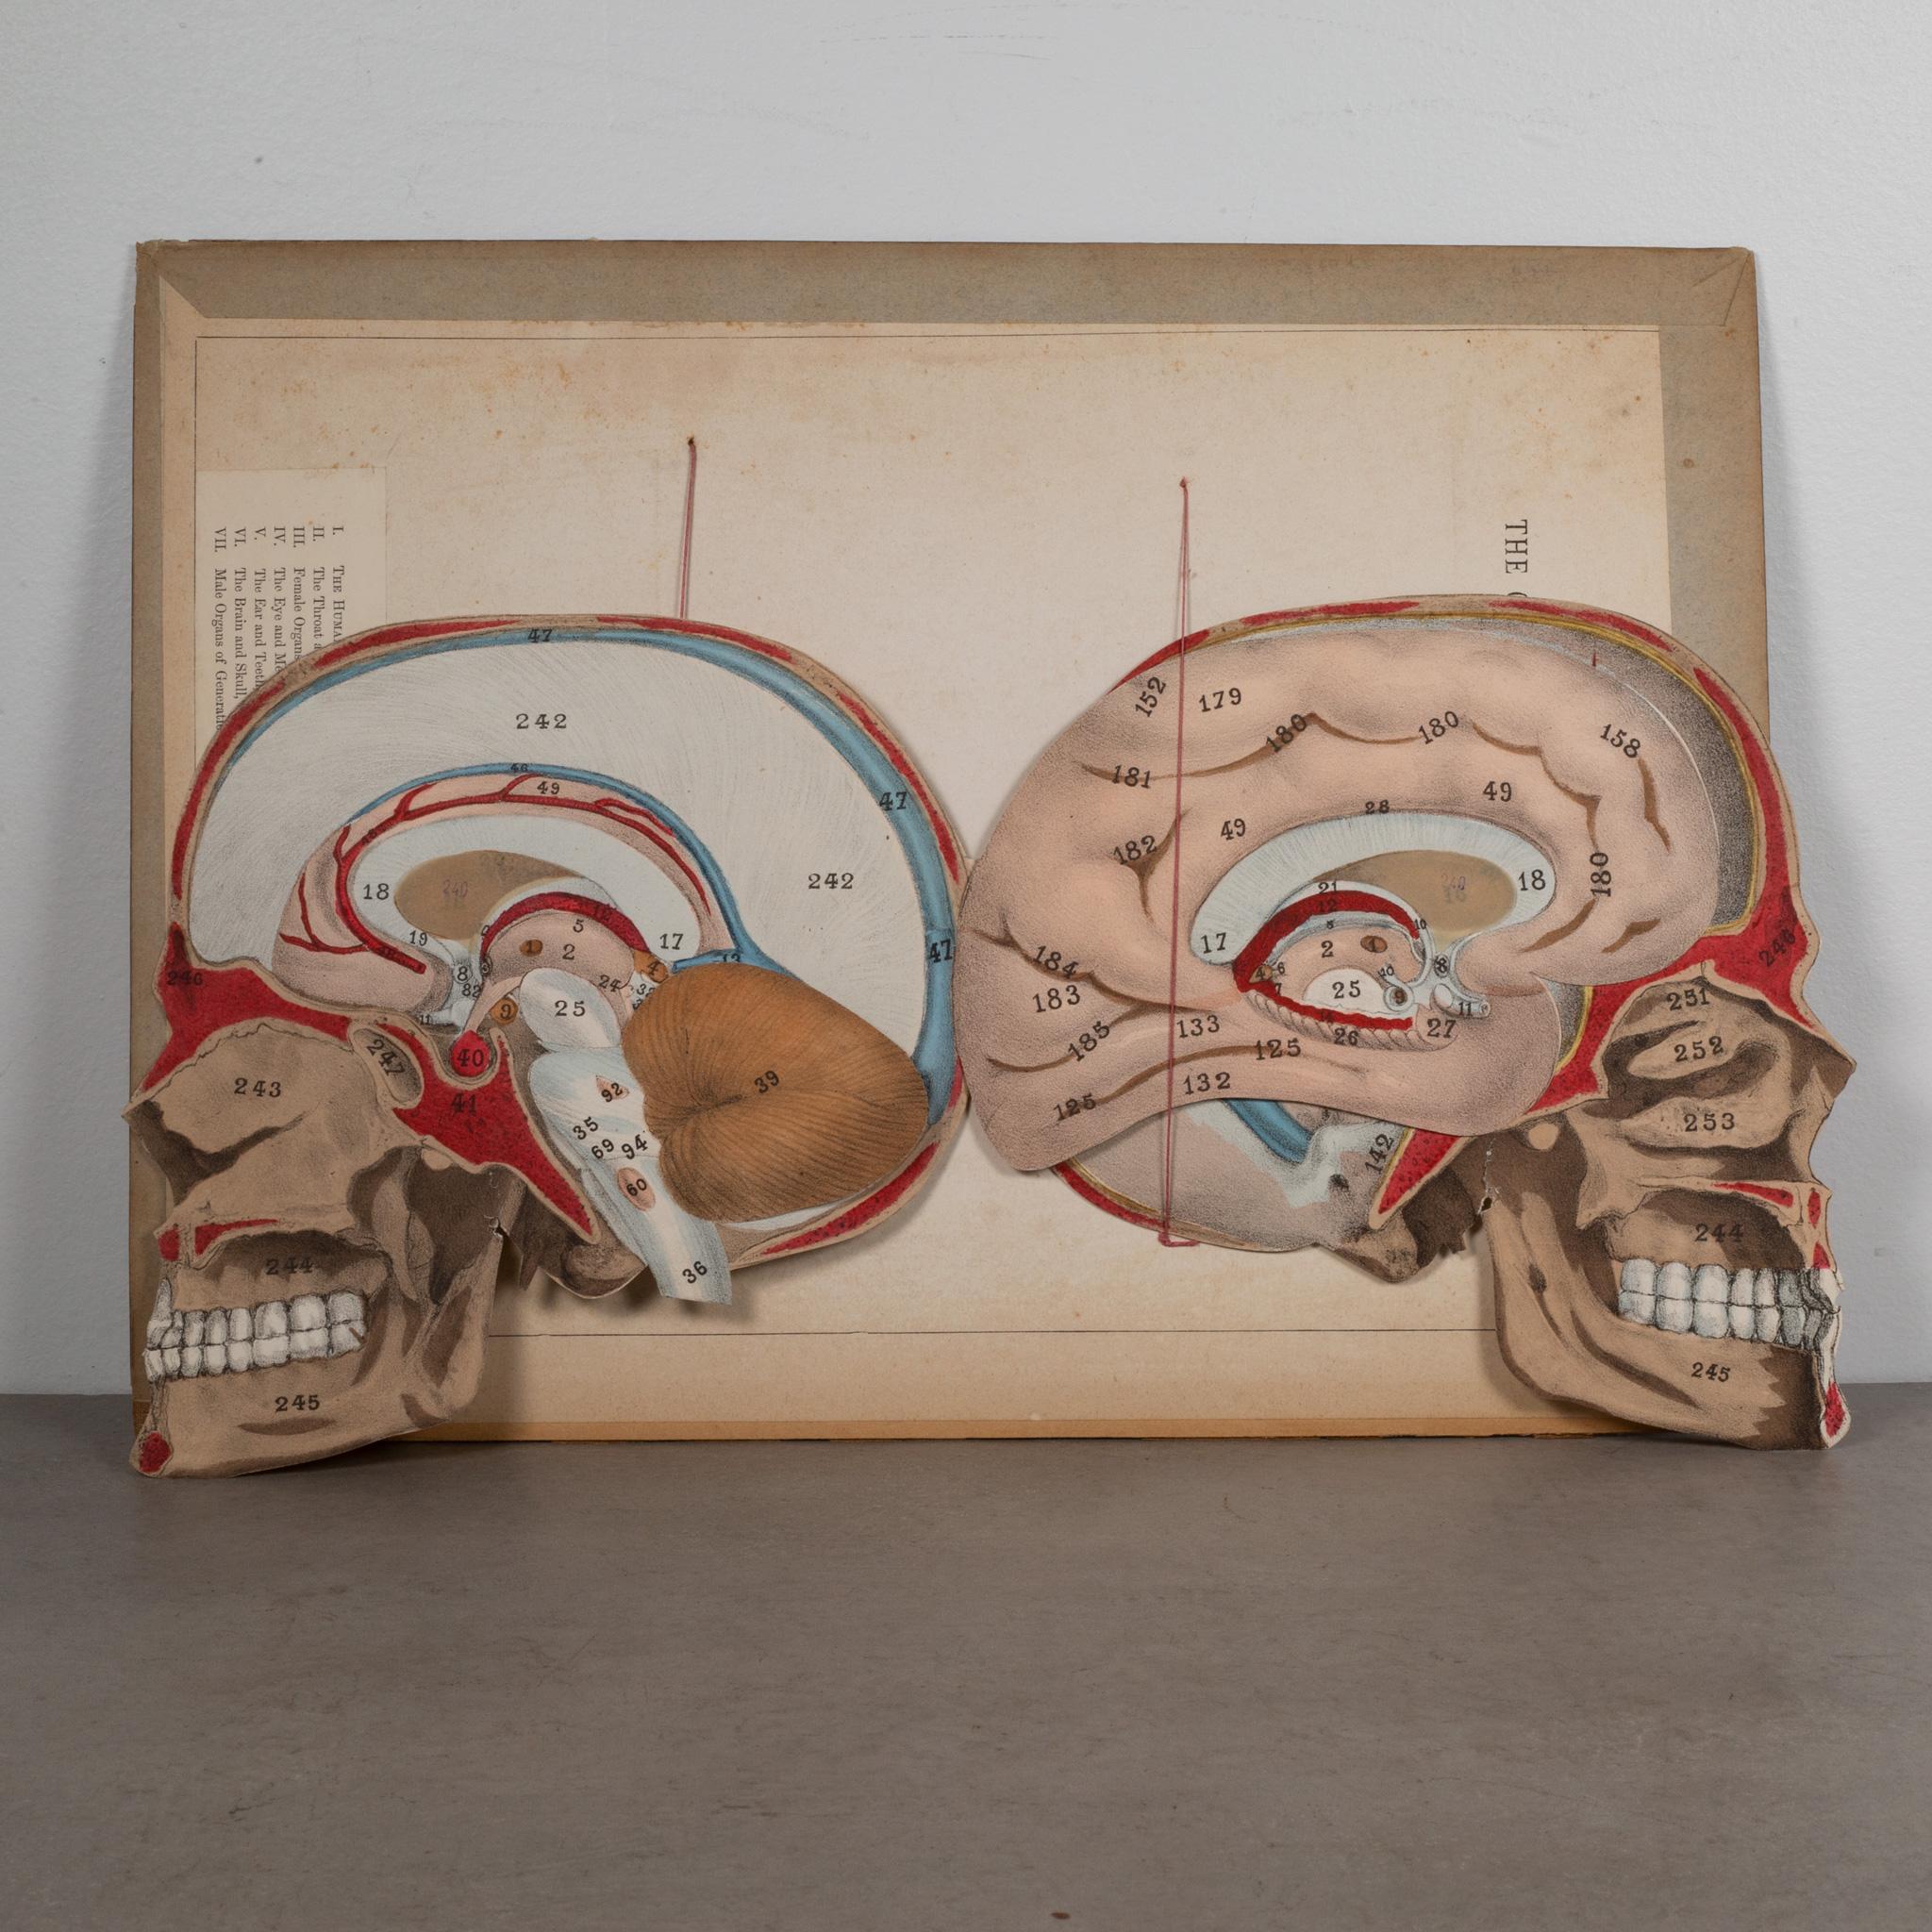 About

An original 19th century medical teaching atlas of the human body including 